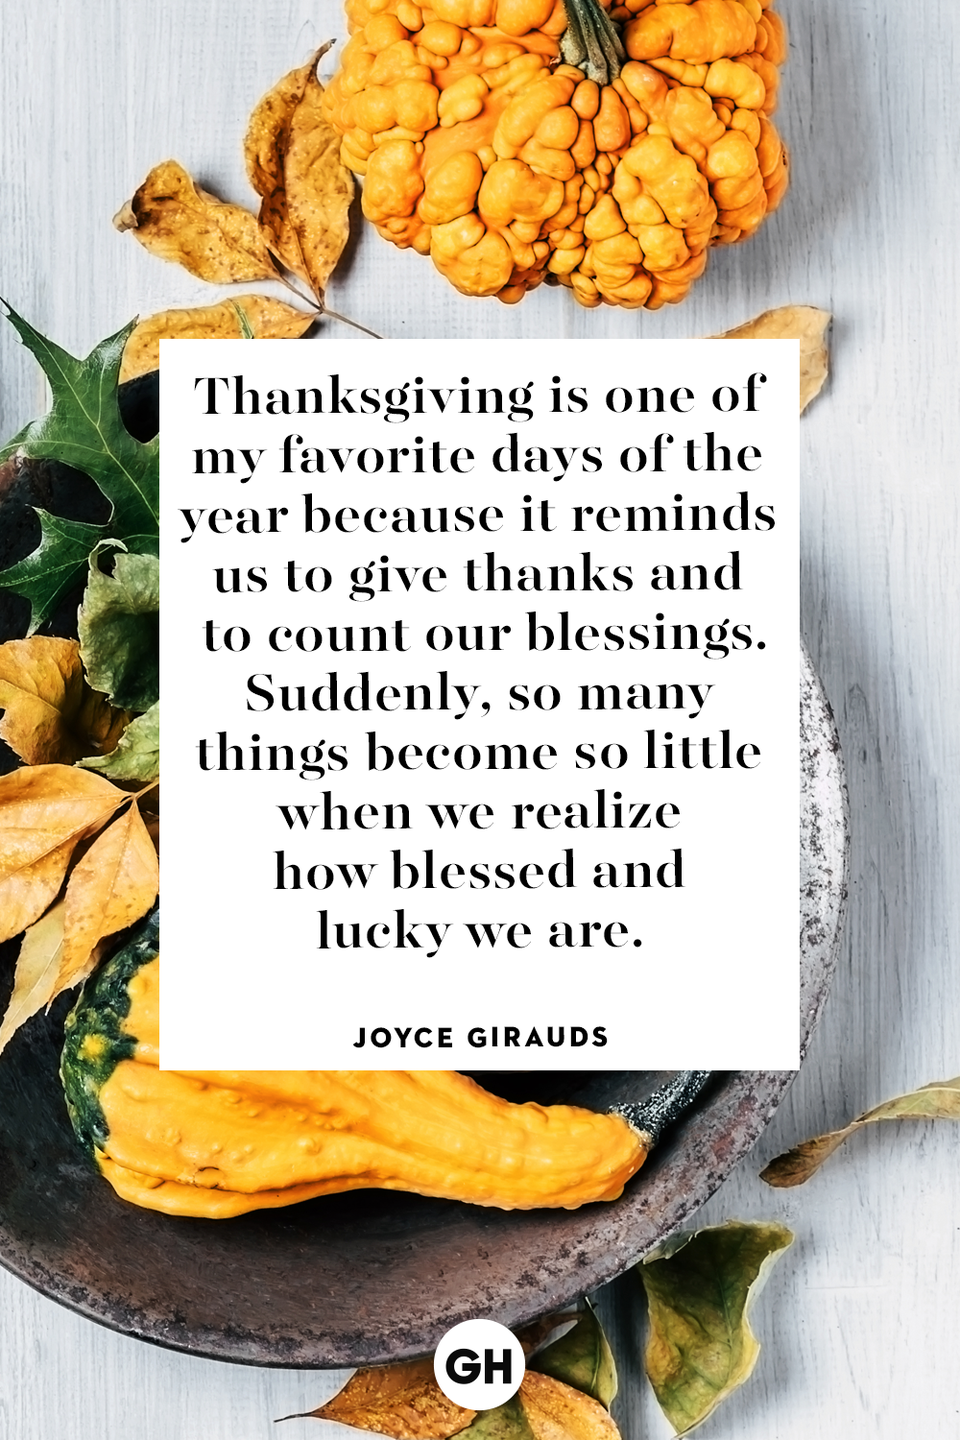 <p>Thanksgiving is one of my favorite days of the year because it reminds us to give thanks and to count our blessings. Suddenly, so many things become so little when we realize how blessed and lucky we are.</p>